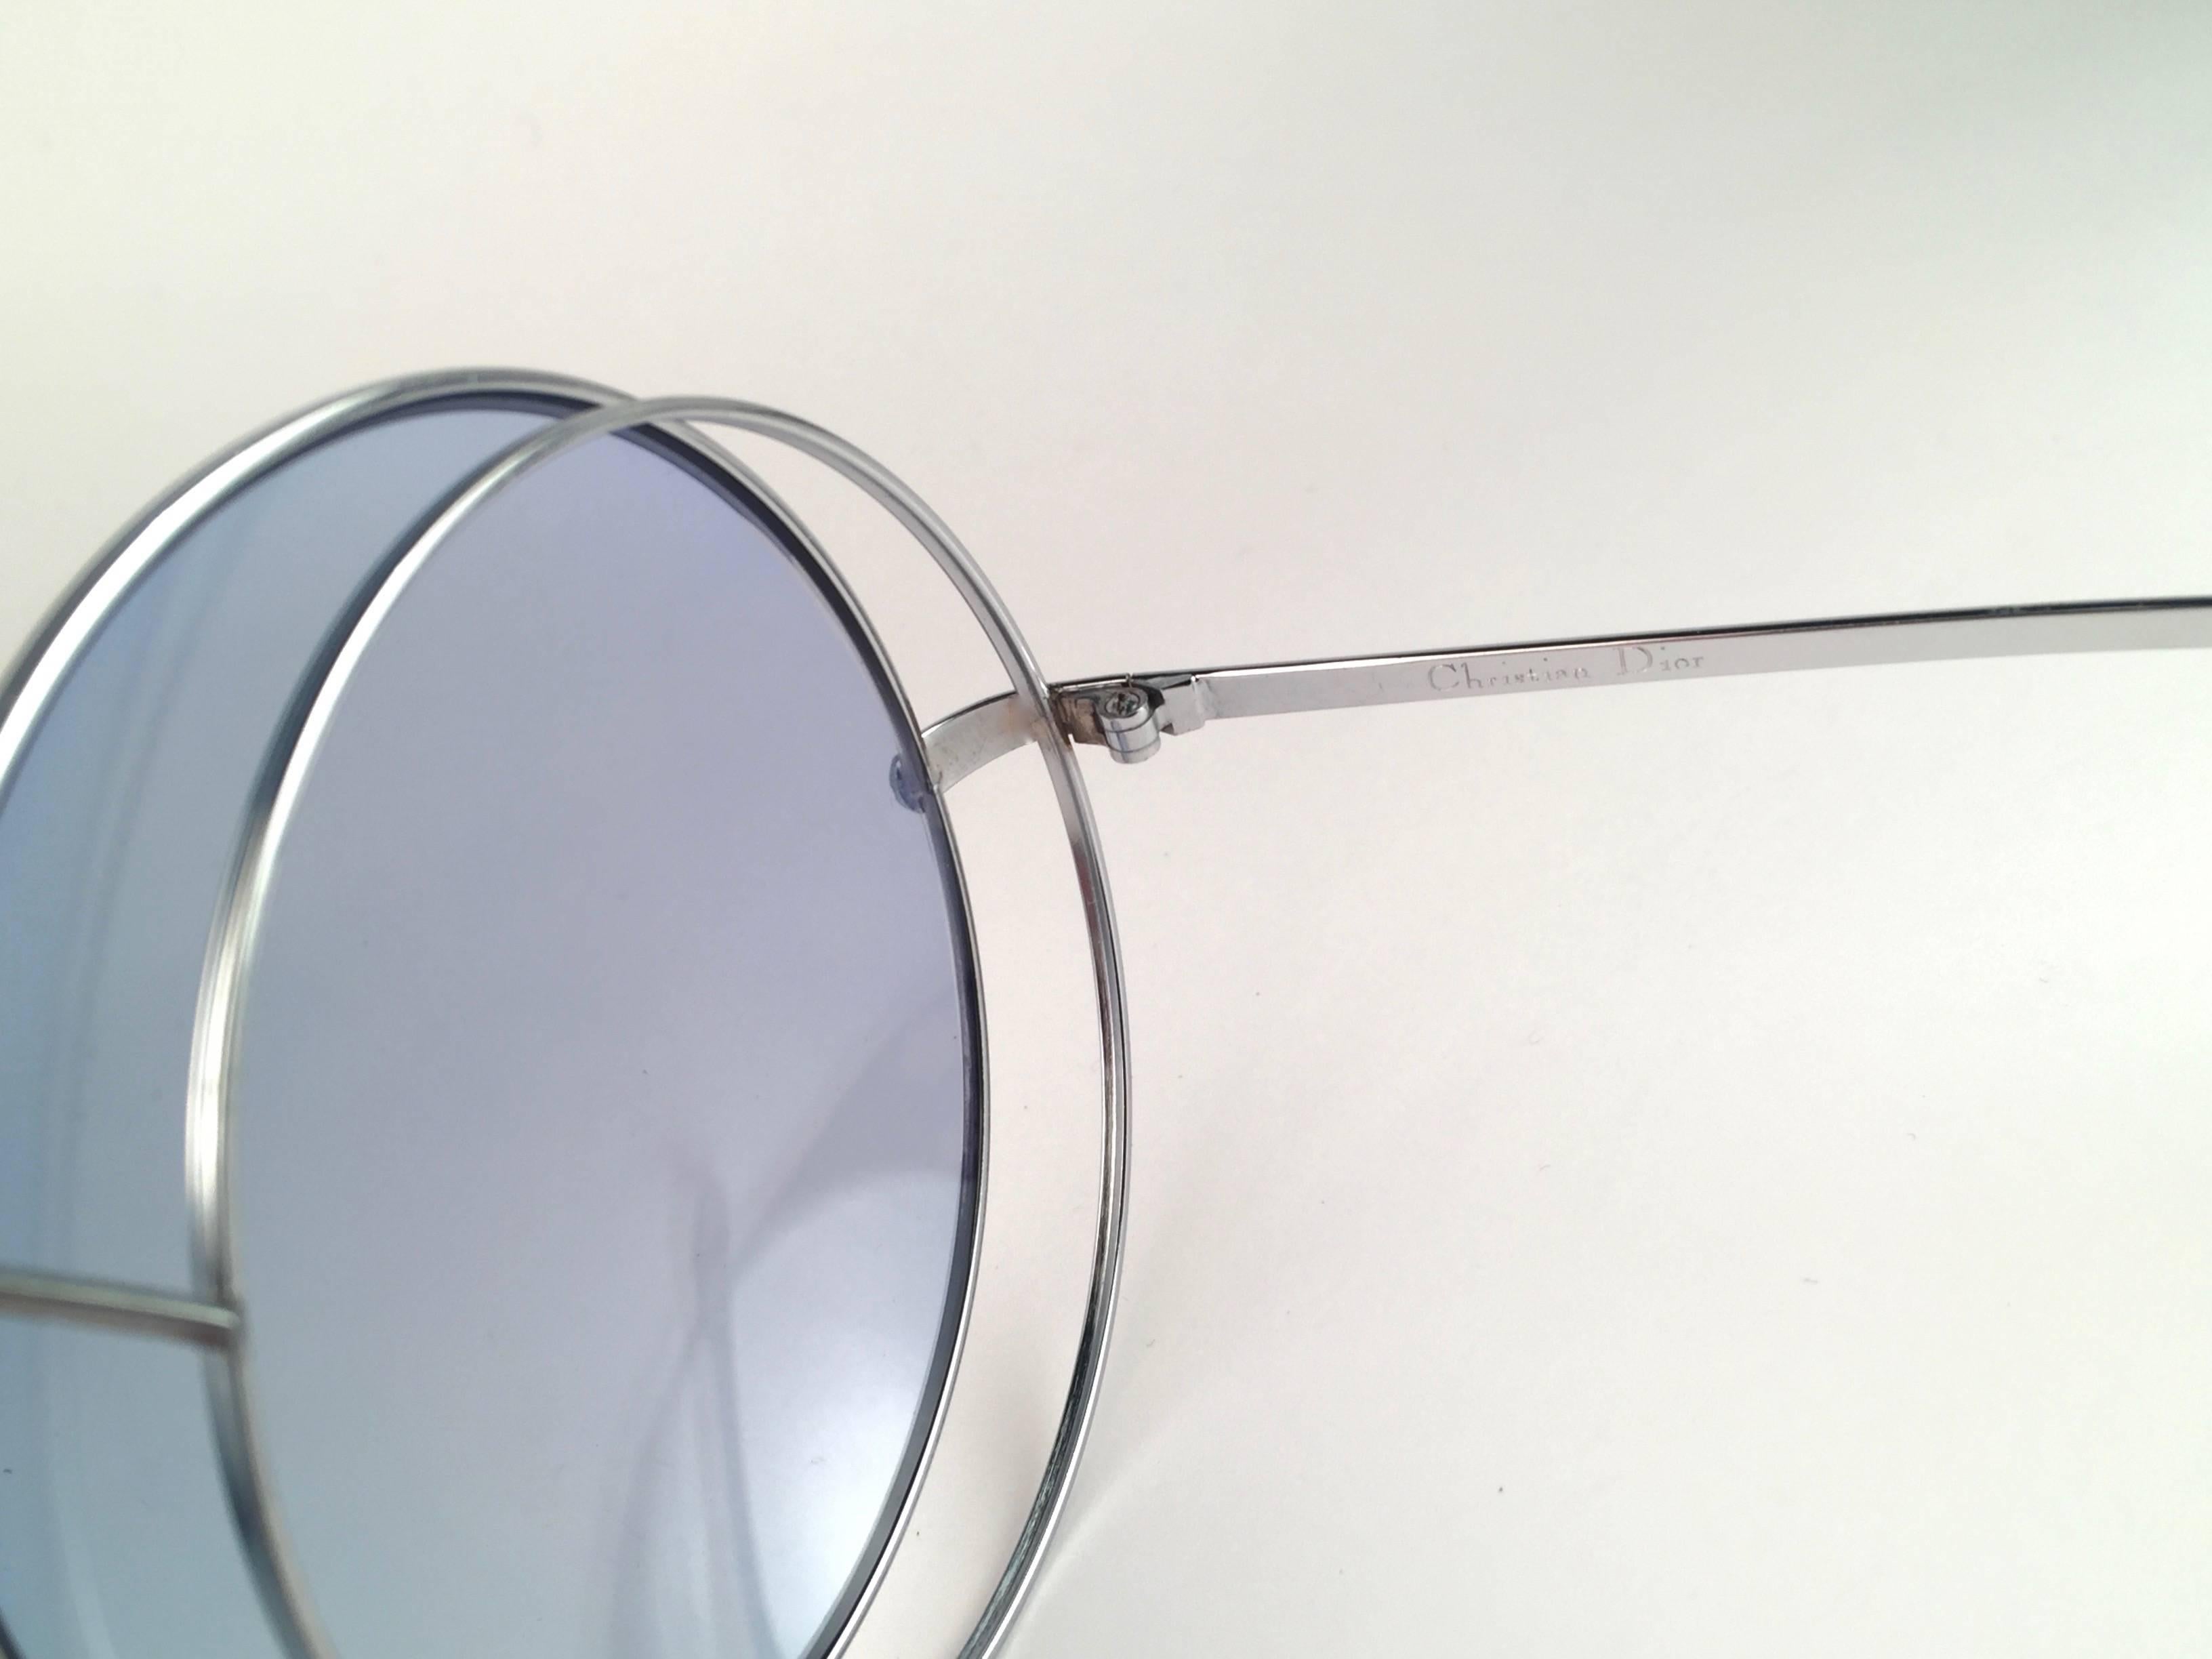 New Rare Vintage Christian Dior Oversized Silver Metal Round Sunglasses 1970's In New Condition For Sale In Baleares, Baleares